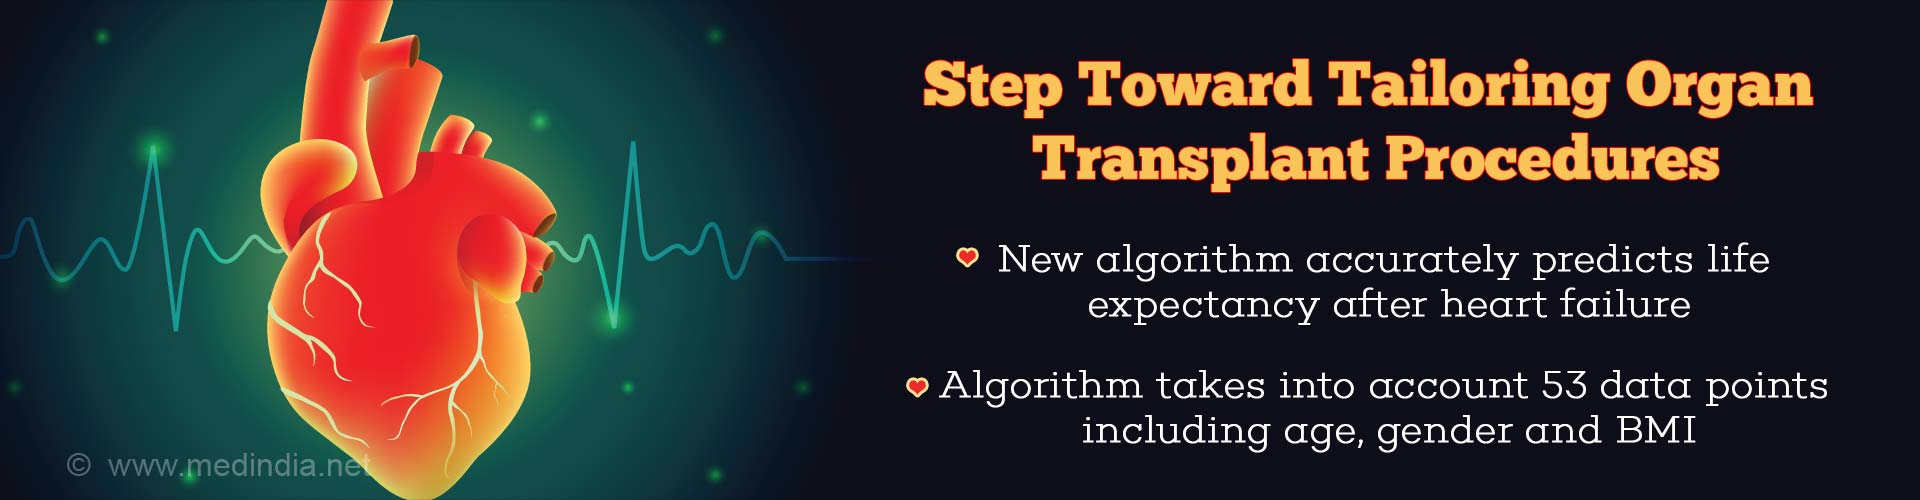 step towards tailoring organ transplant procedures
- new algorithm accurately predicts life expectancy after heart failure
- algorithm takes into account 53 data points including age, gender and BMI